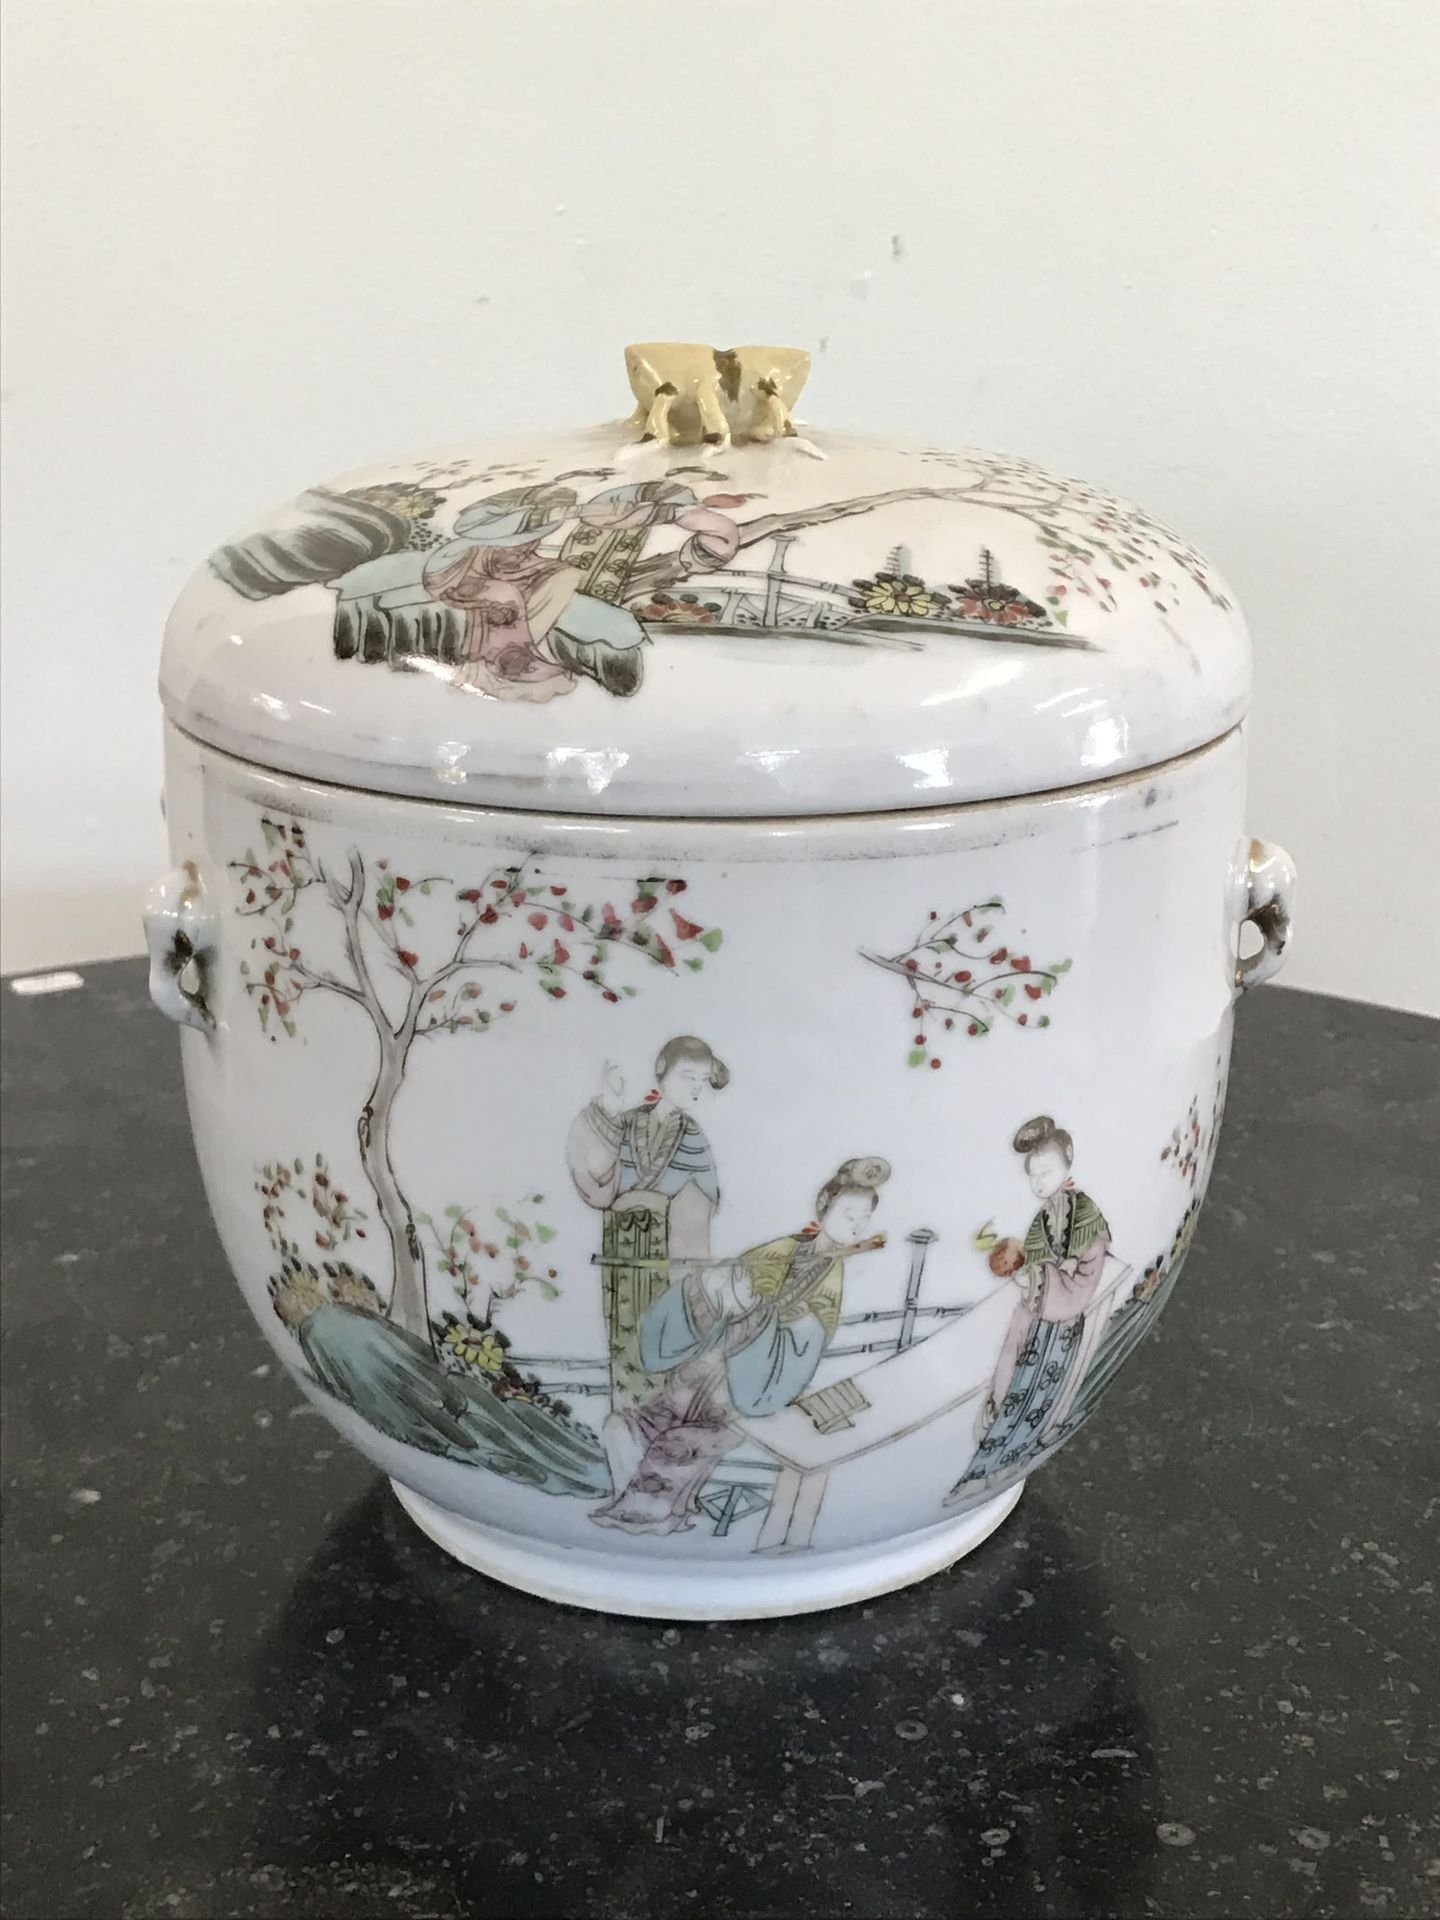 Null CHINA

Covered pot in enamelled porcelain decorated with women playing musi&hellip;